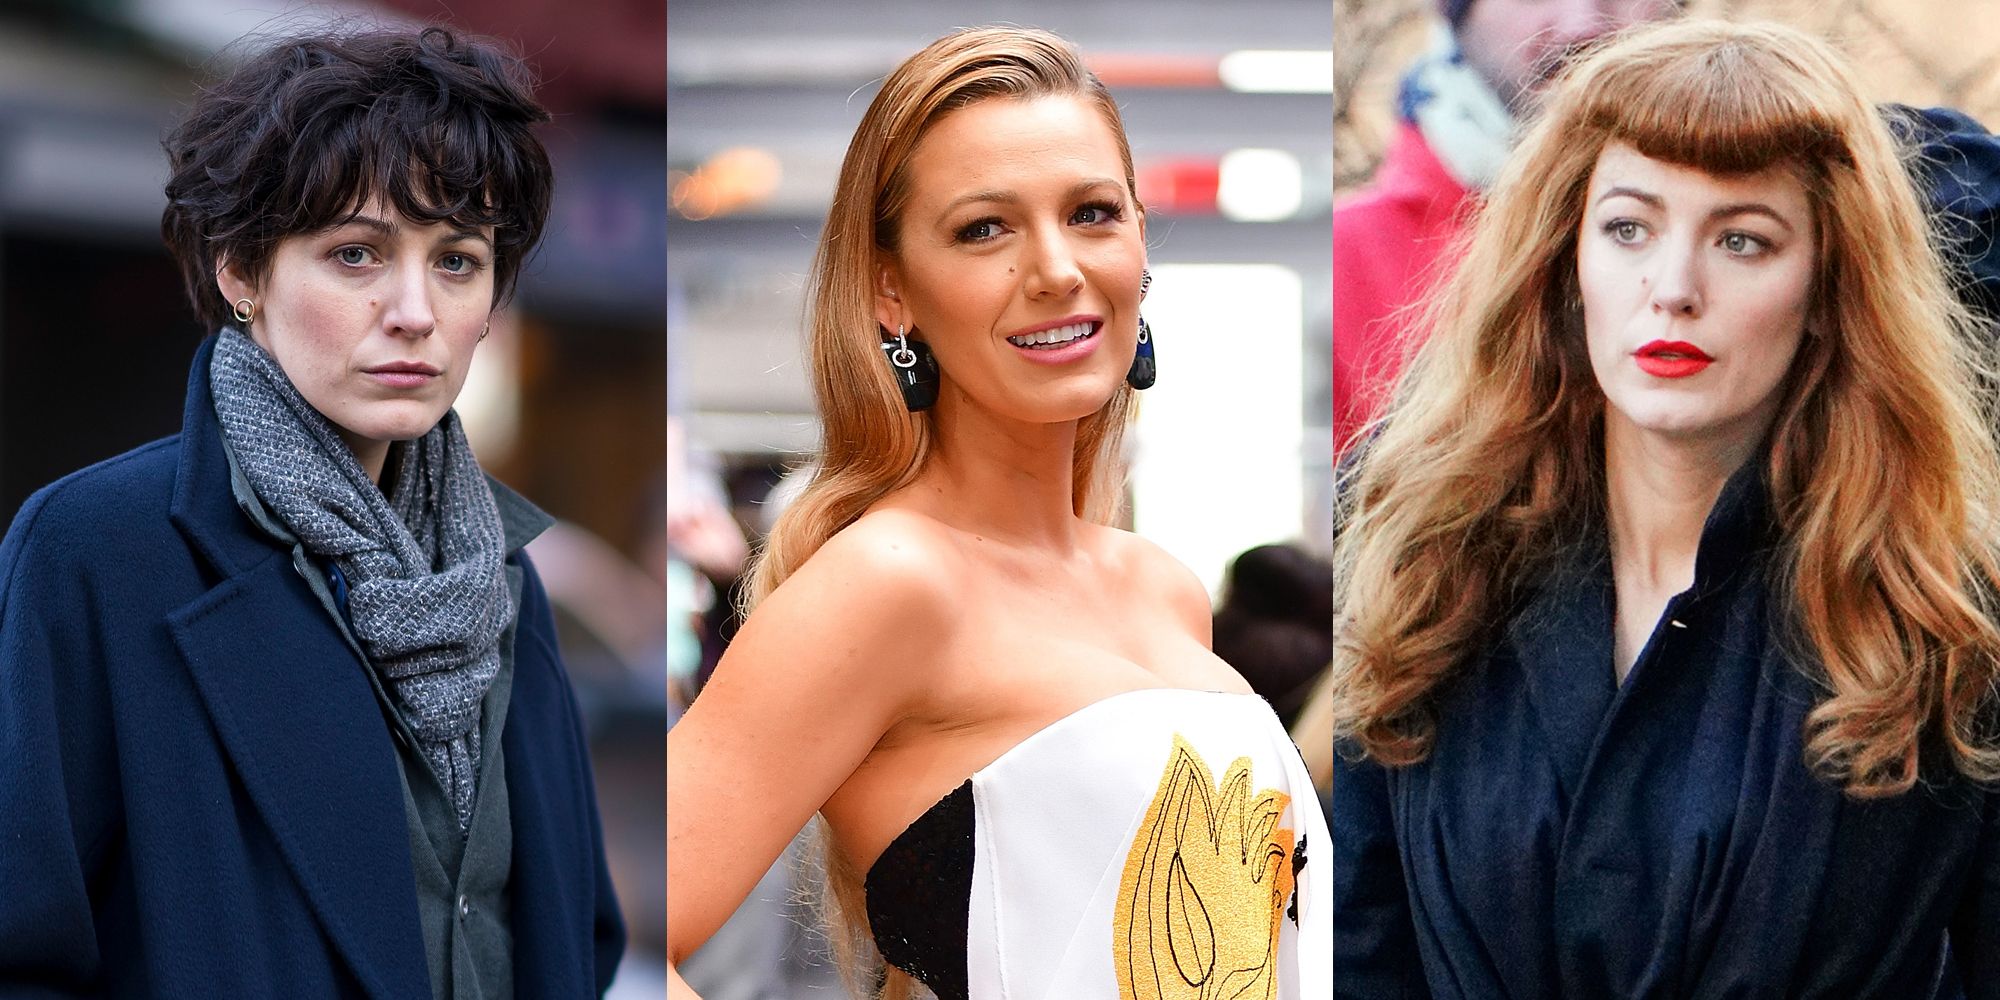 Blake Lively in Every Hair Color - Blake Lively as a Brunette, Redhead and  With Black Hair